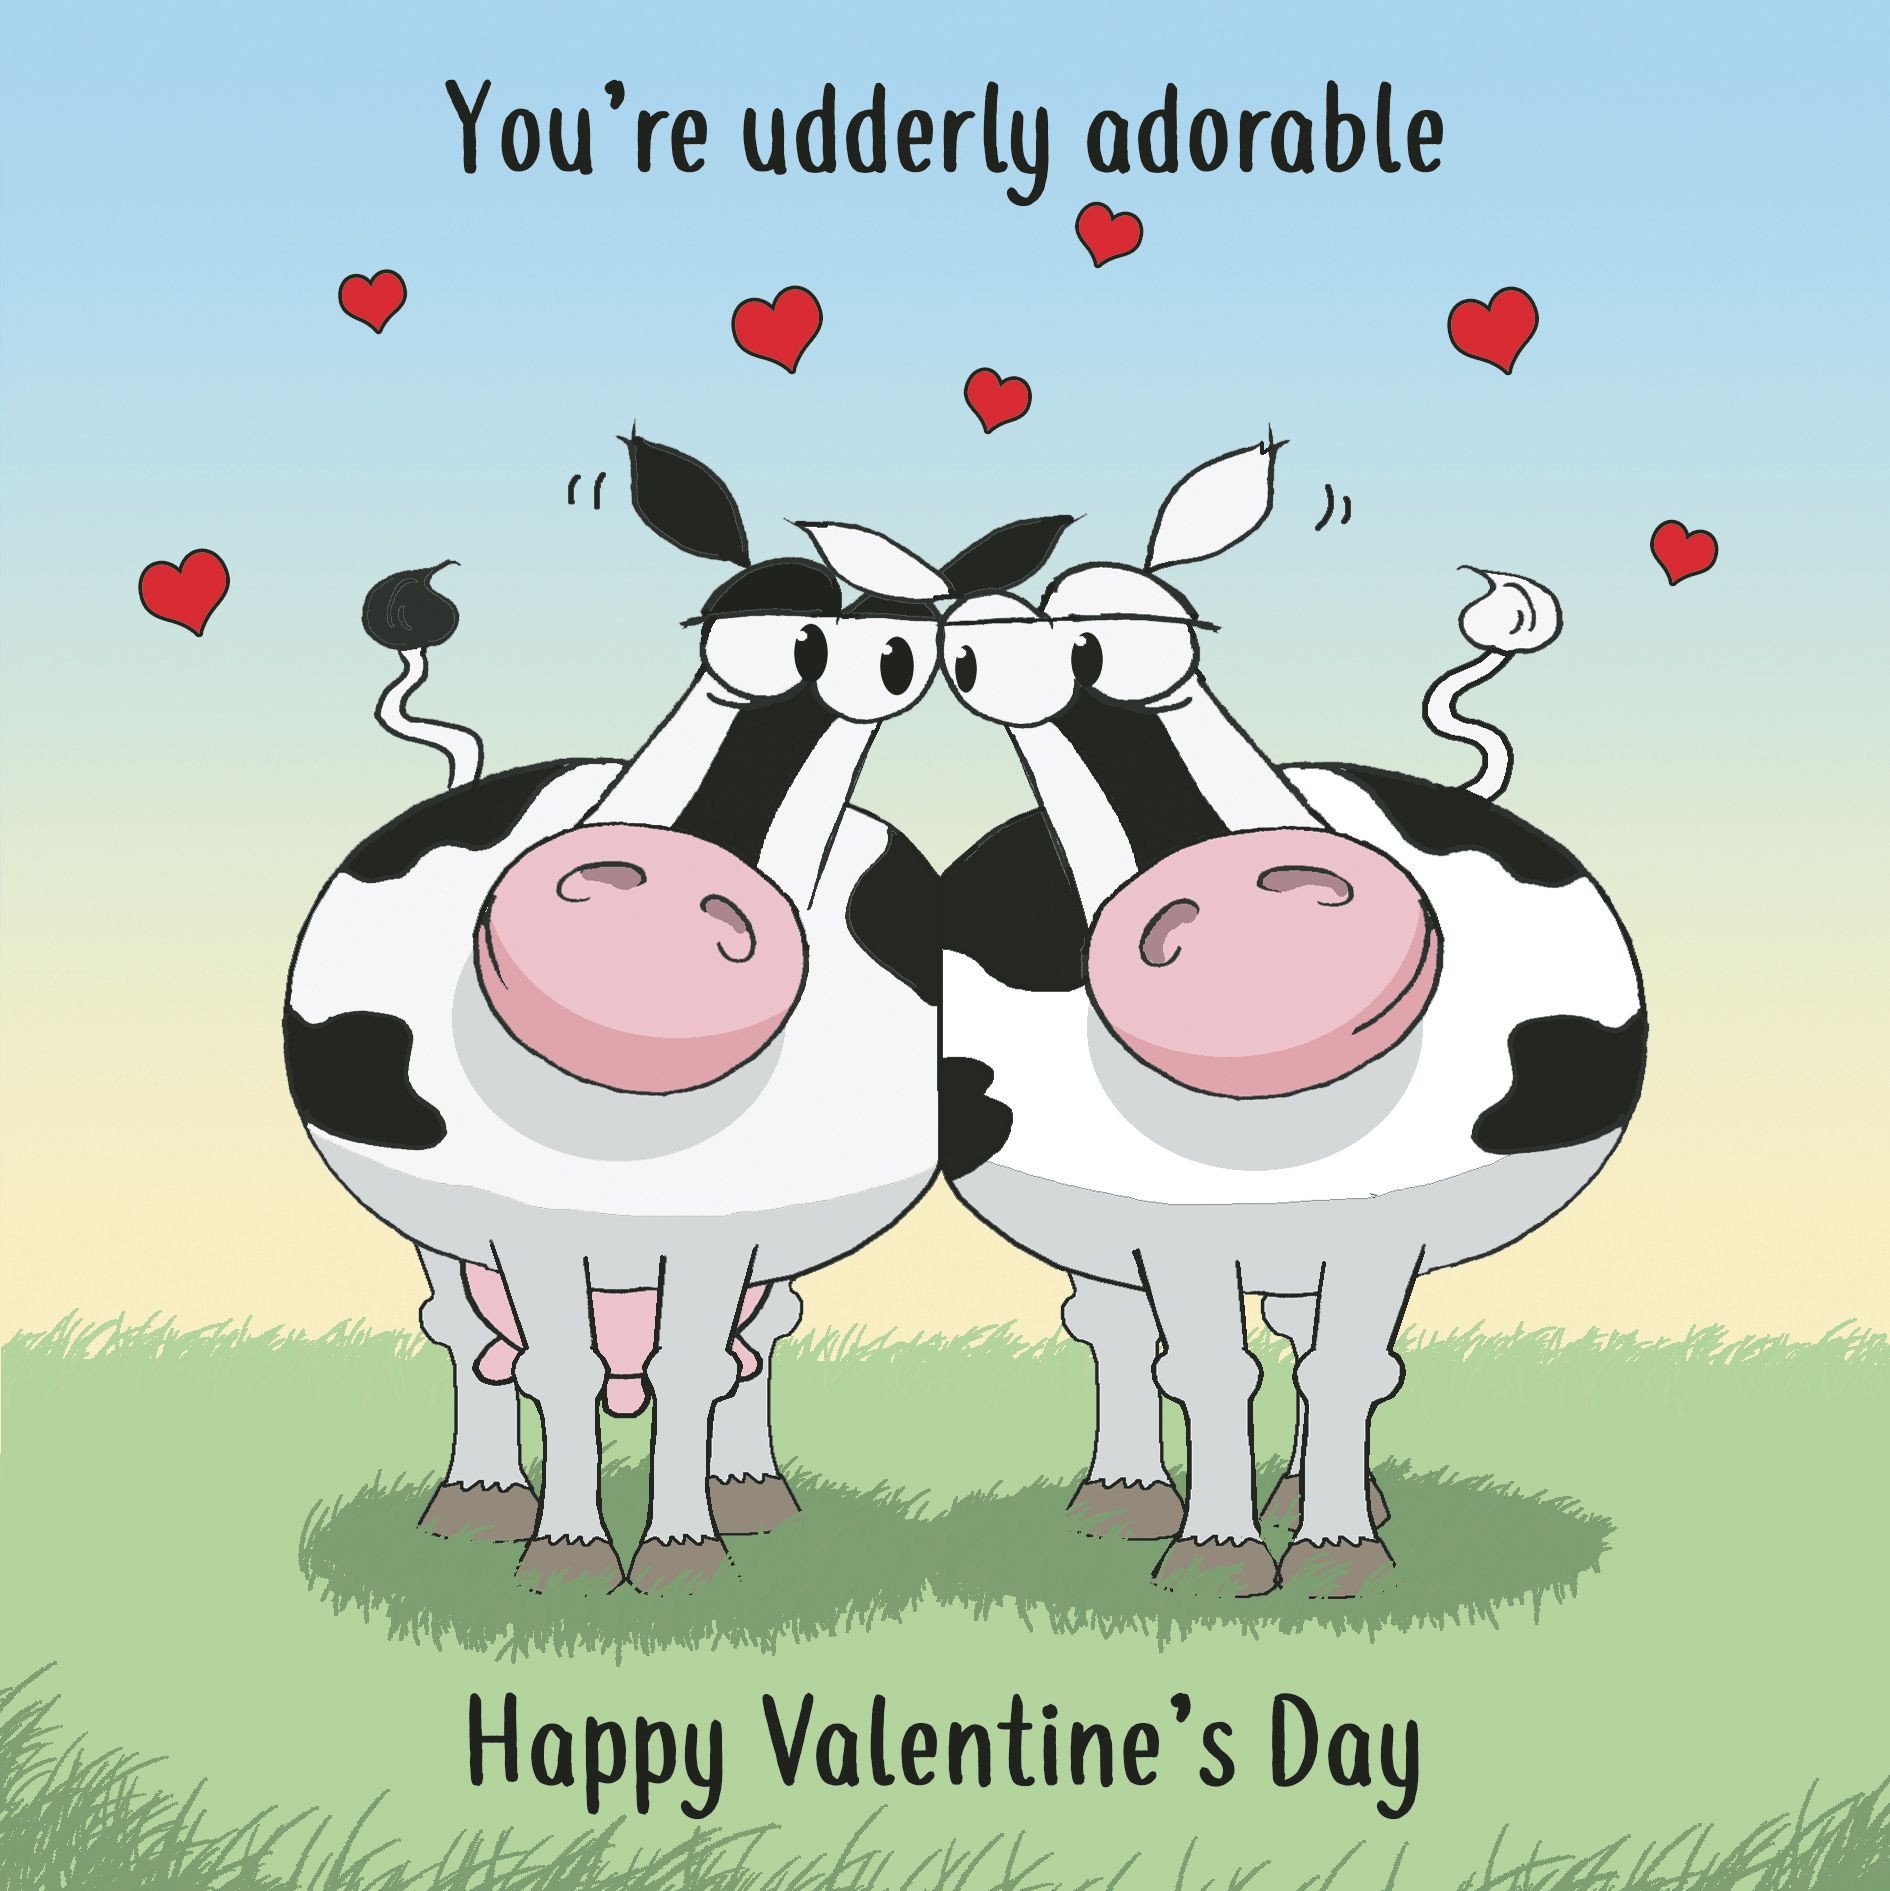 Valentines Day Quote Funny
 Funny Valentines Day Cards Funny Valentine Cards Funny